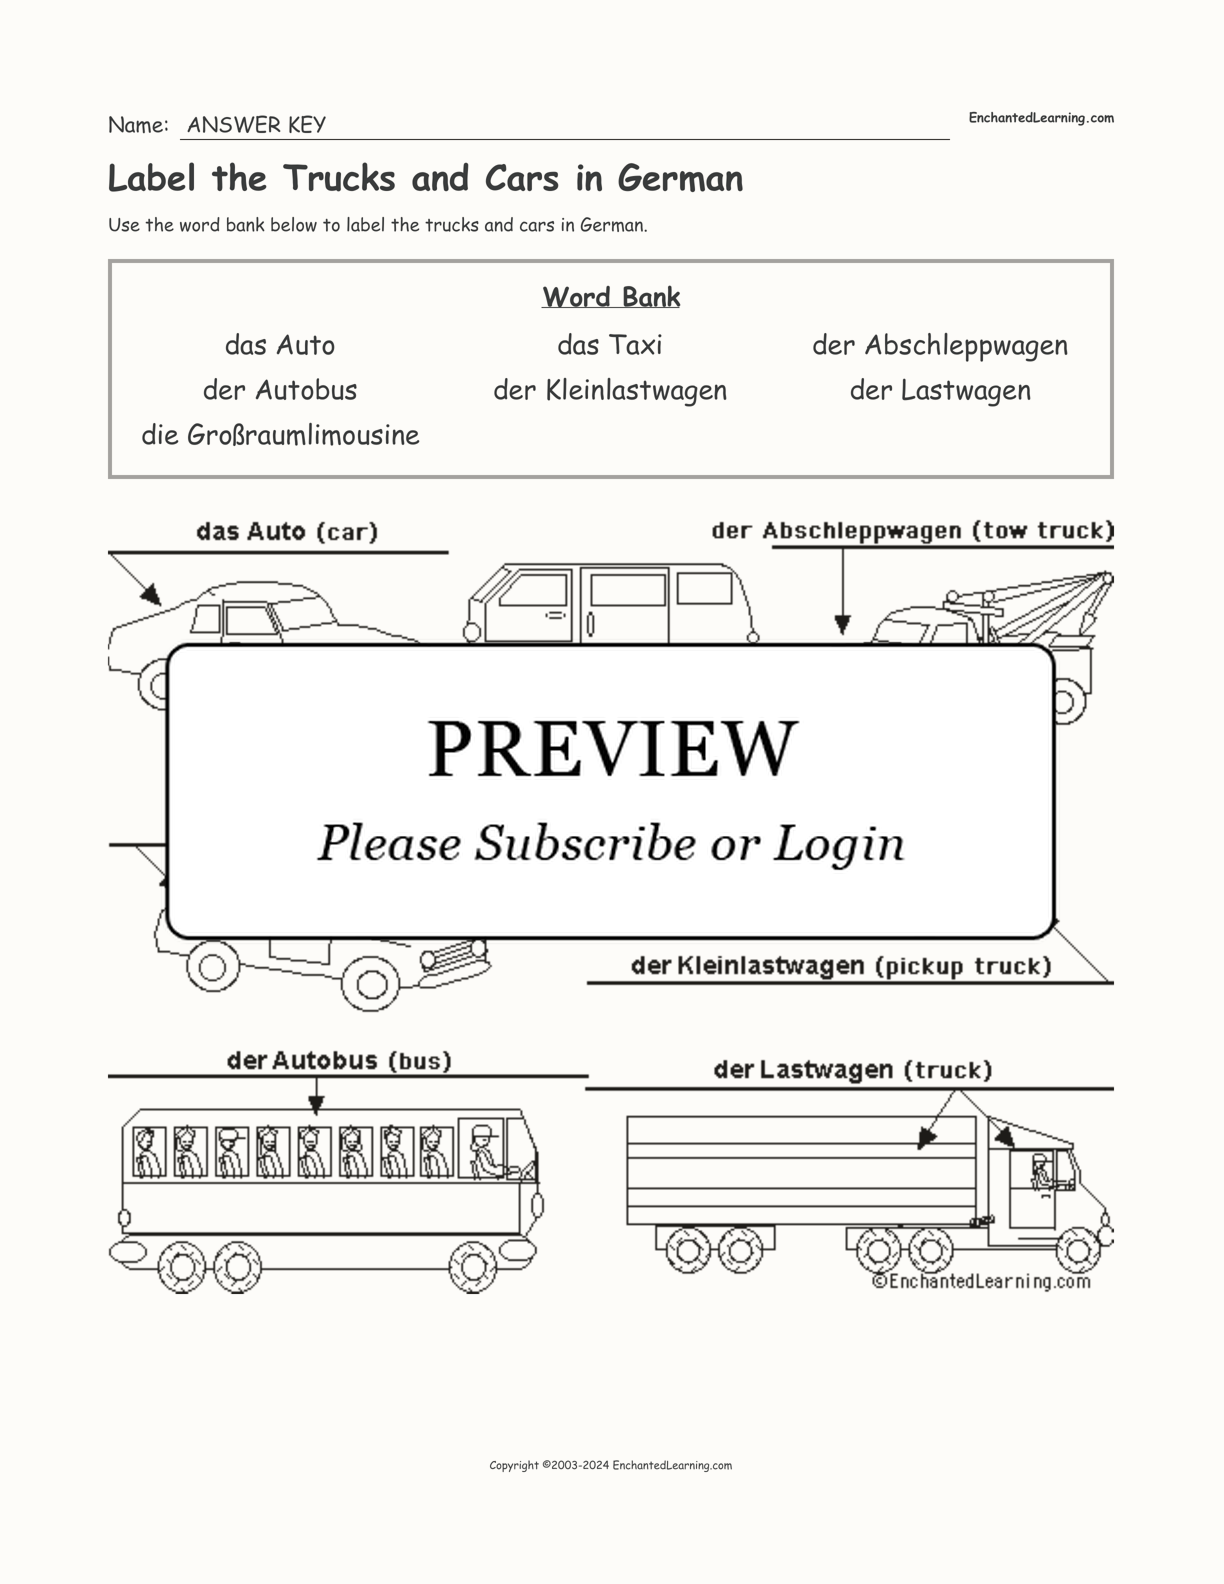 Label the Trucks and Cars in German interactive worksheet page 2